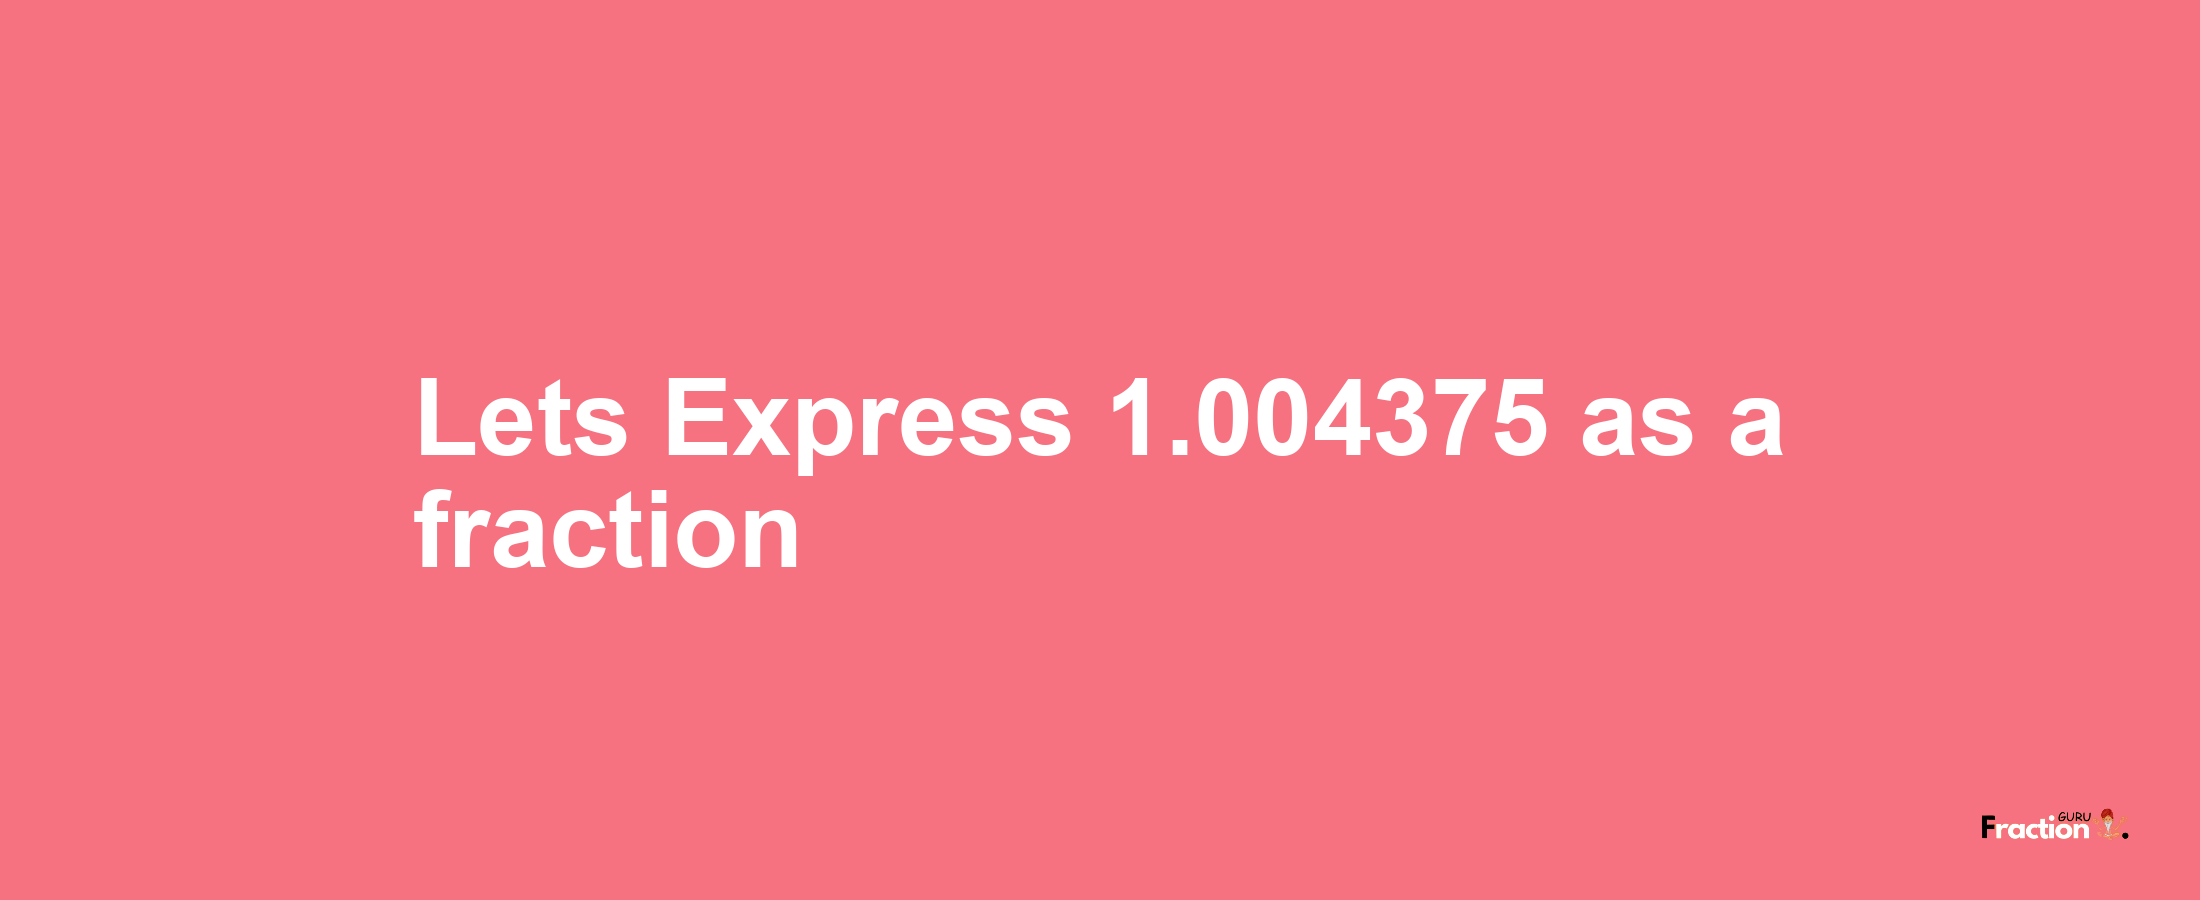 Lets Express 1.004375 as afraction